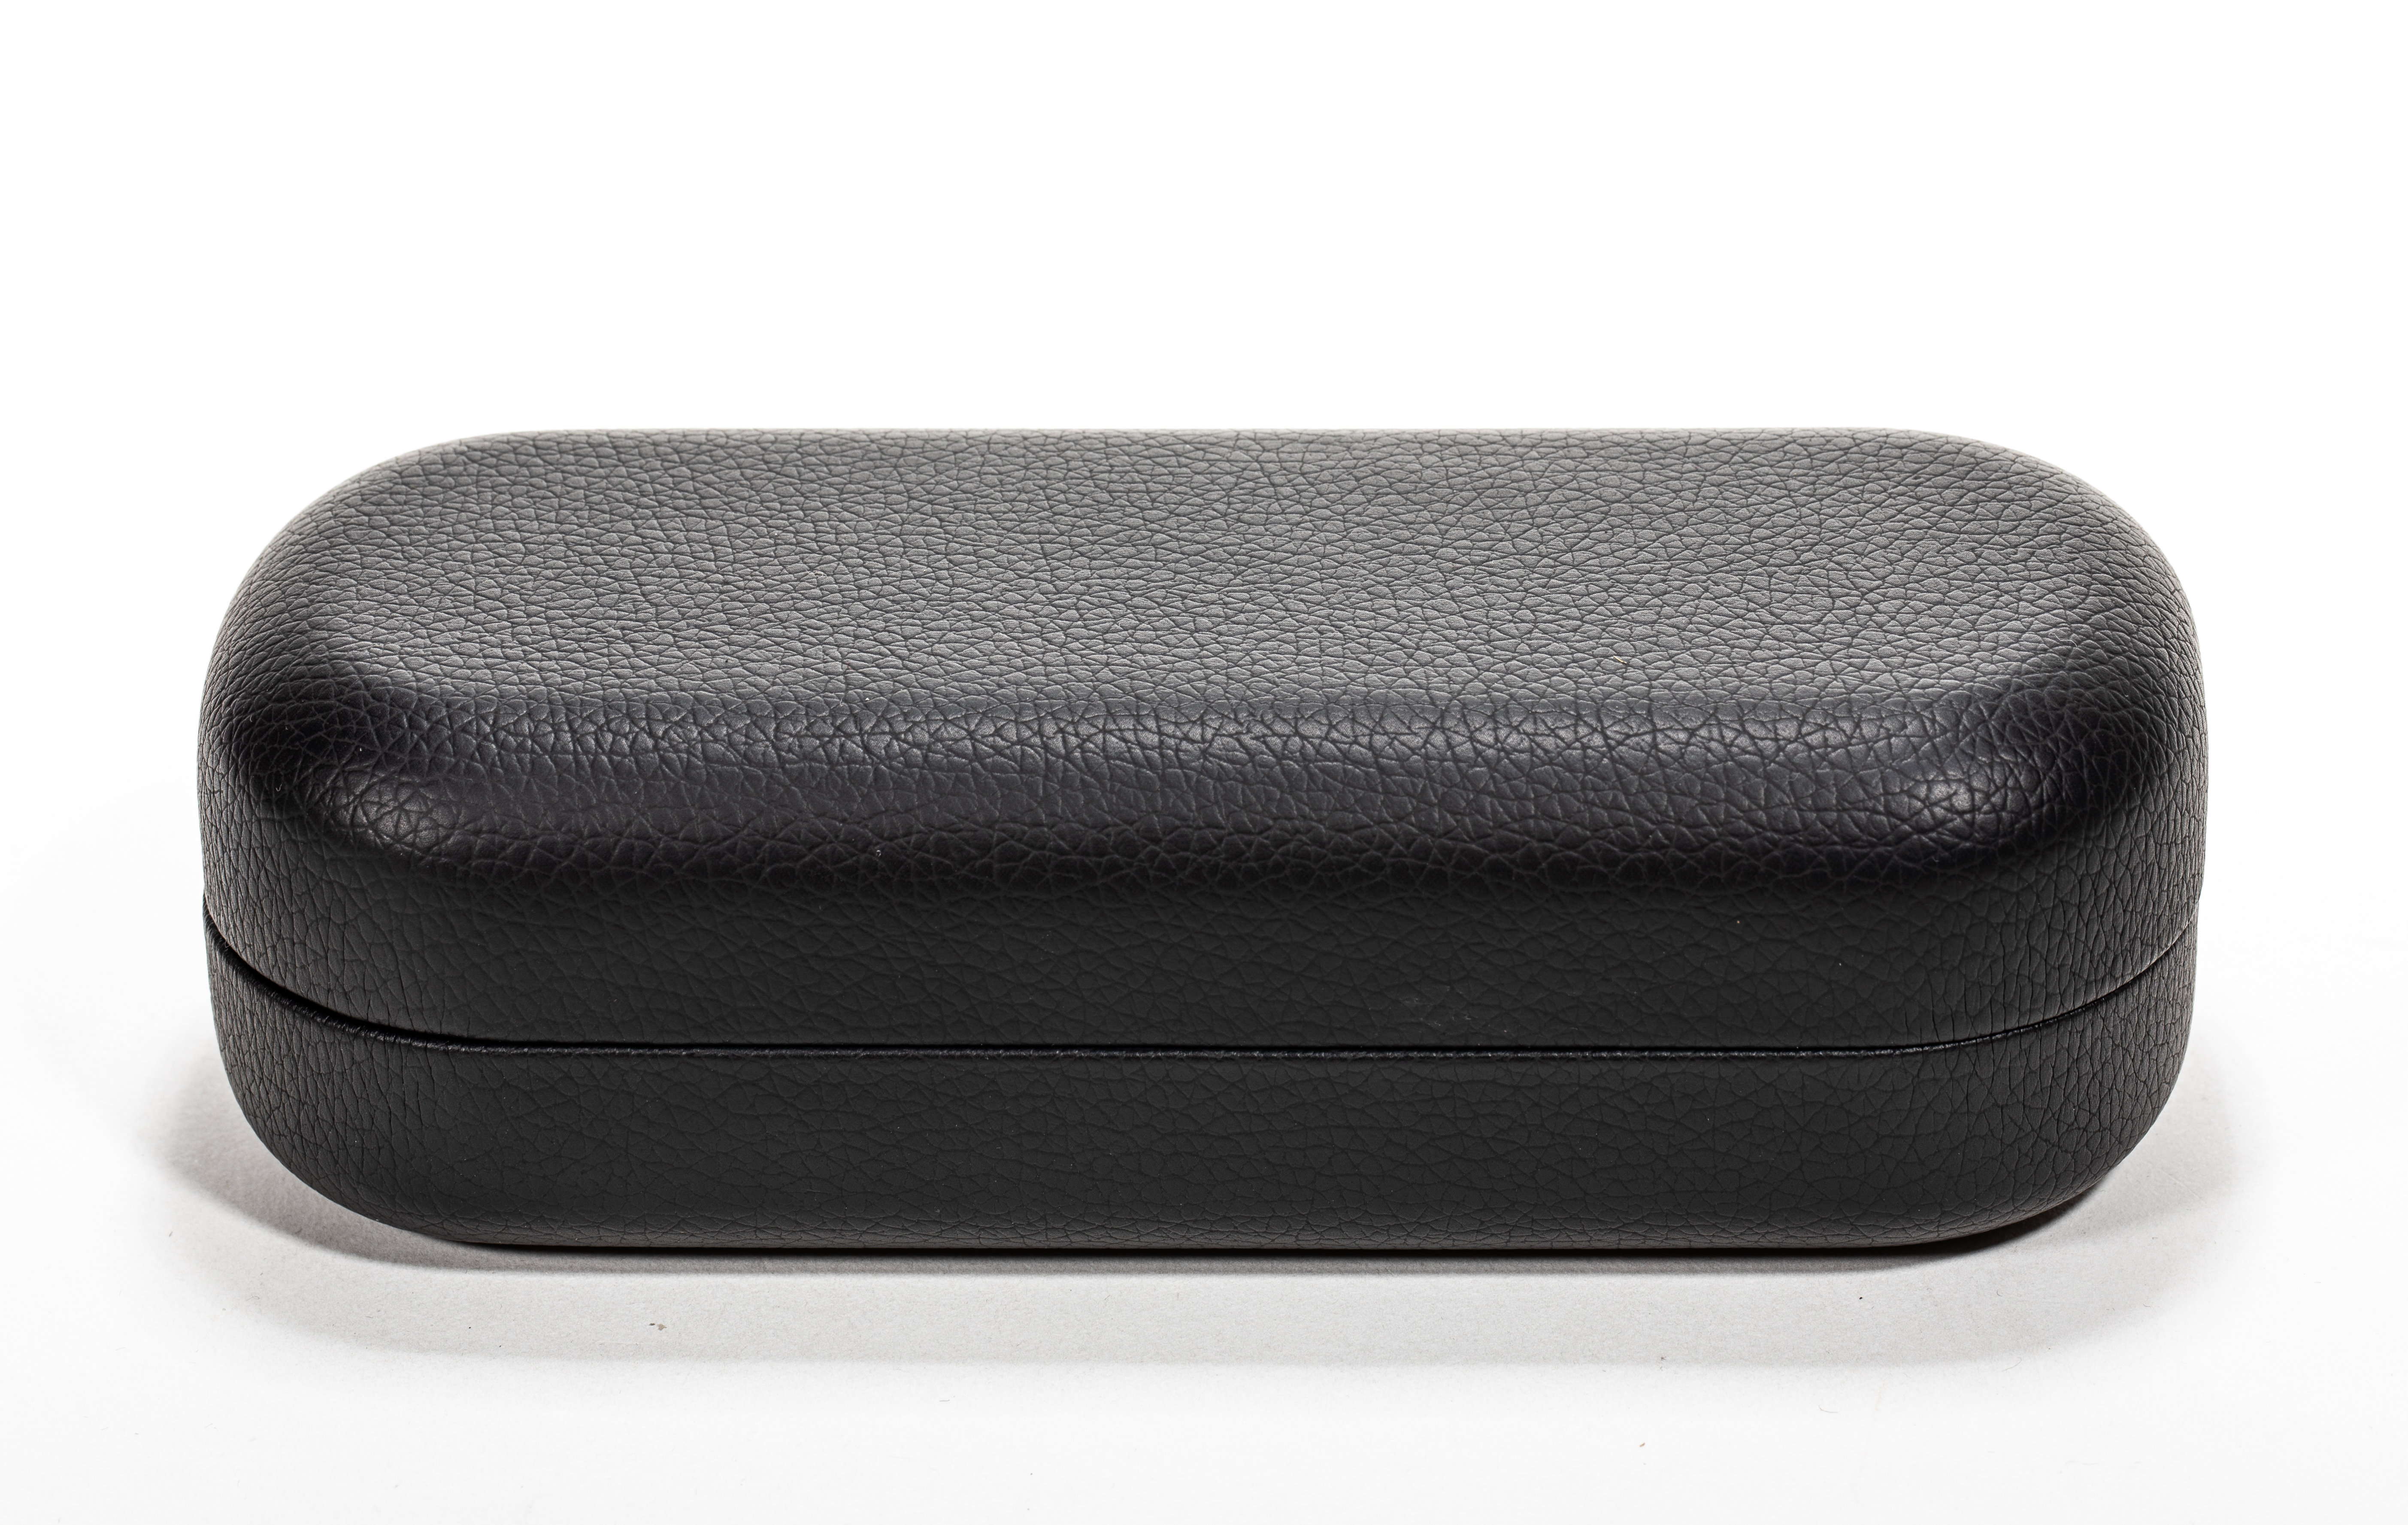 Hard Sunglasses Cases for Large to oversized frames